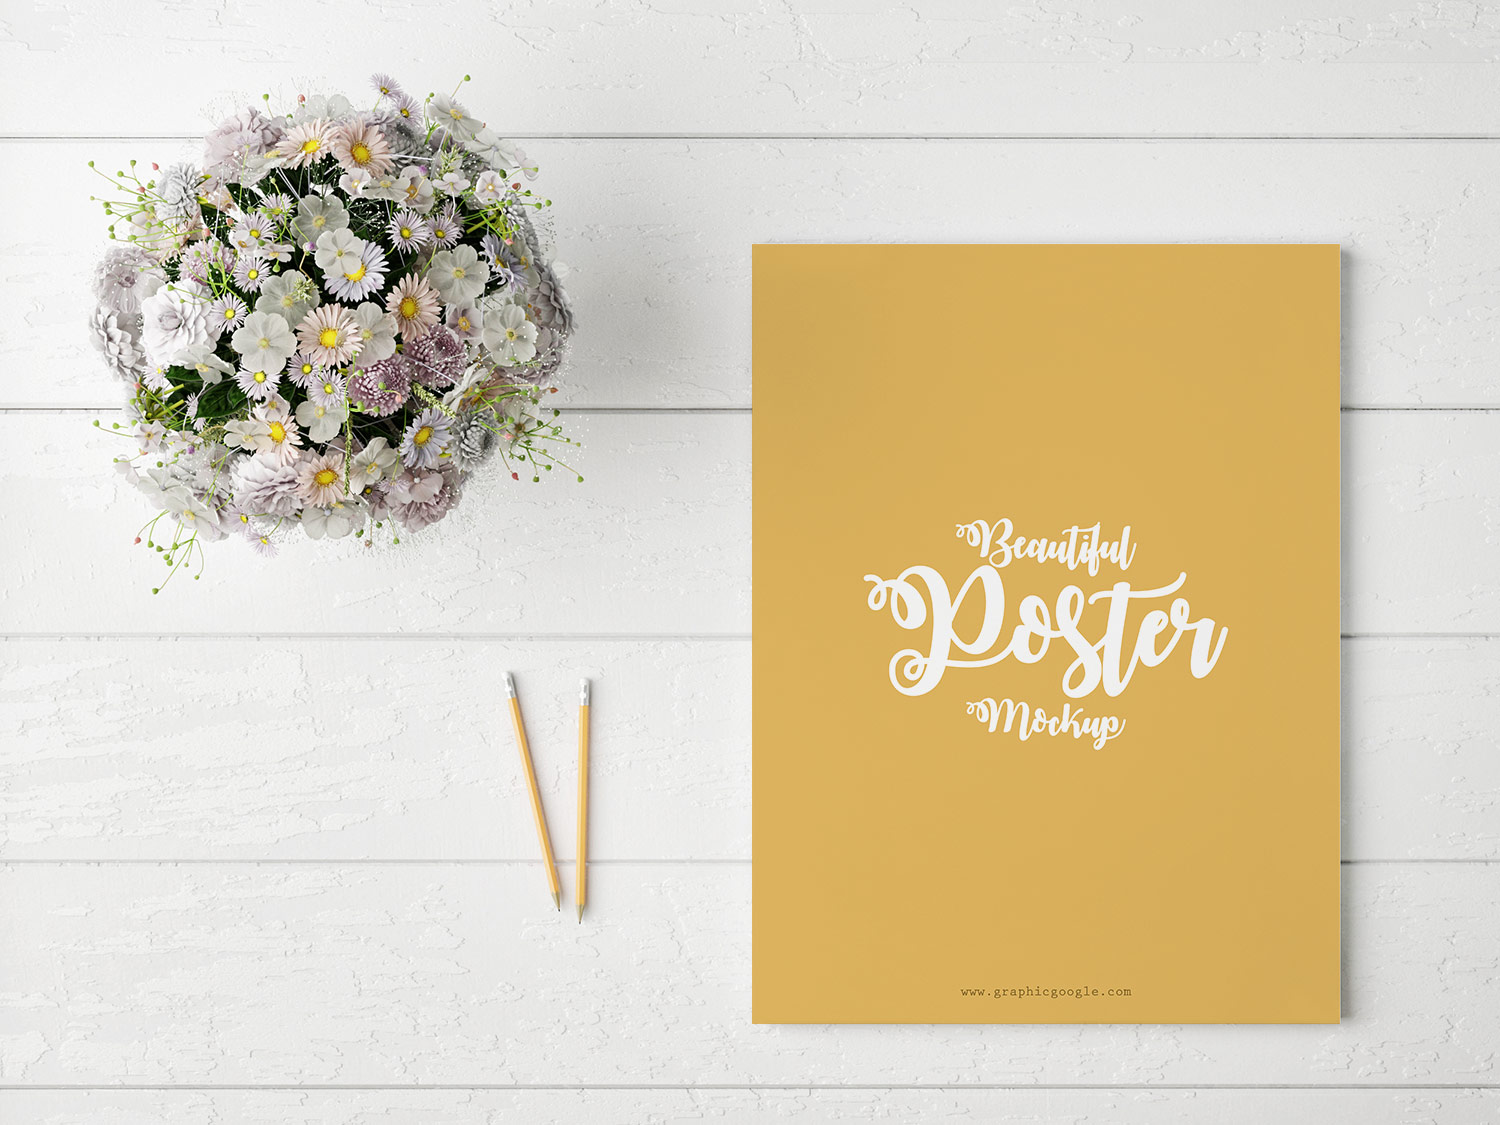 Download Poster-With-Flowers-Free-PSD-Mockup | Free Mockup